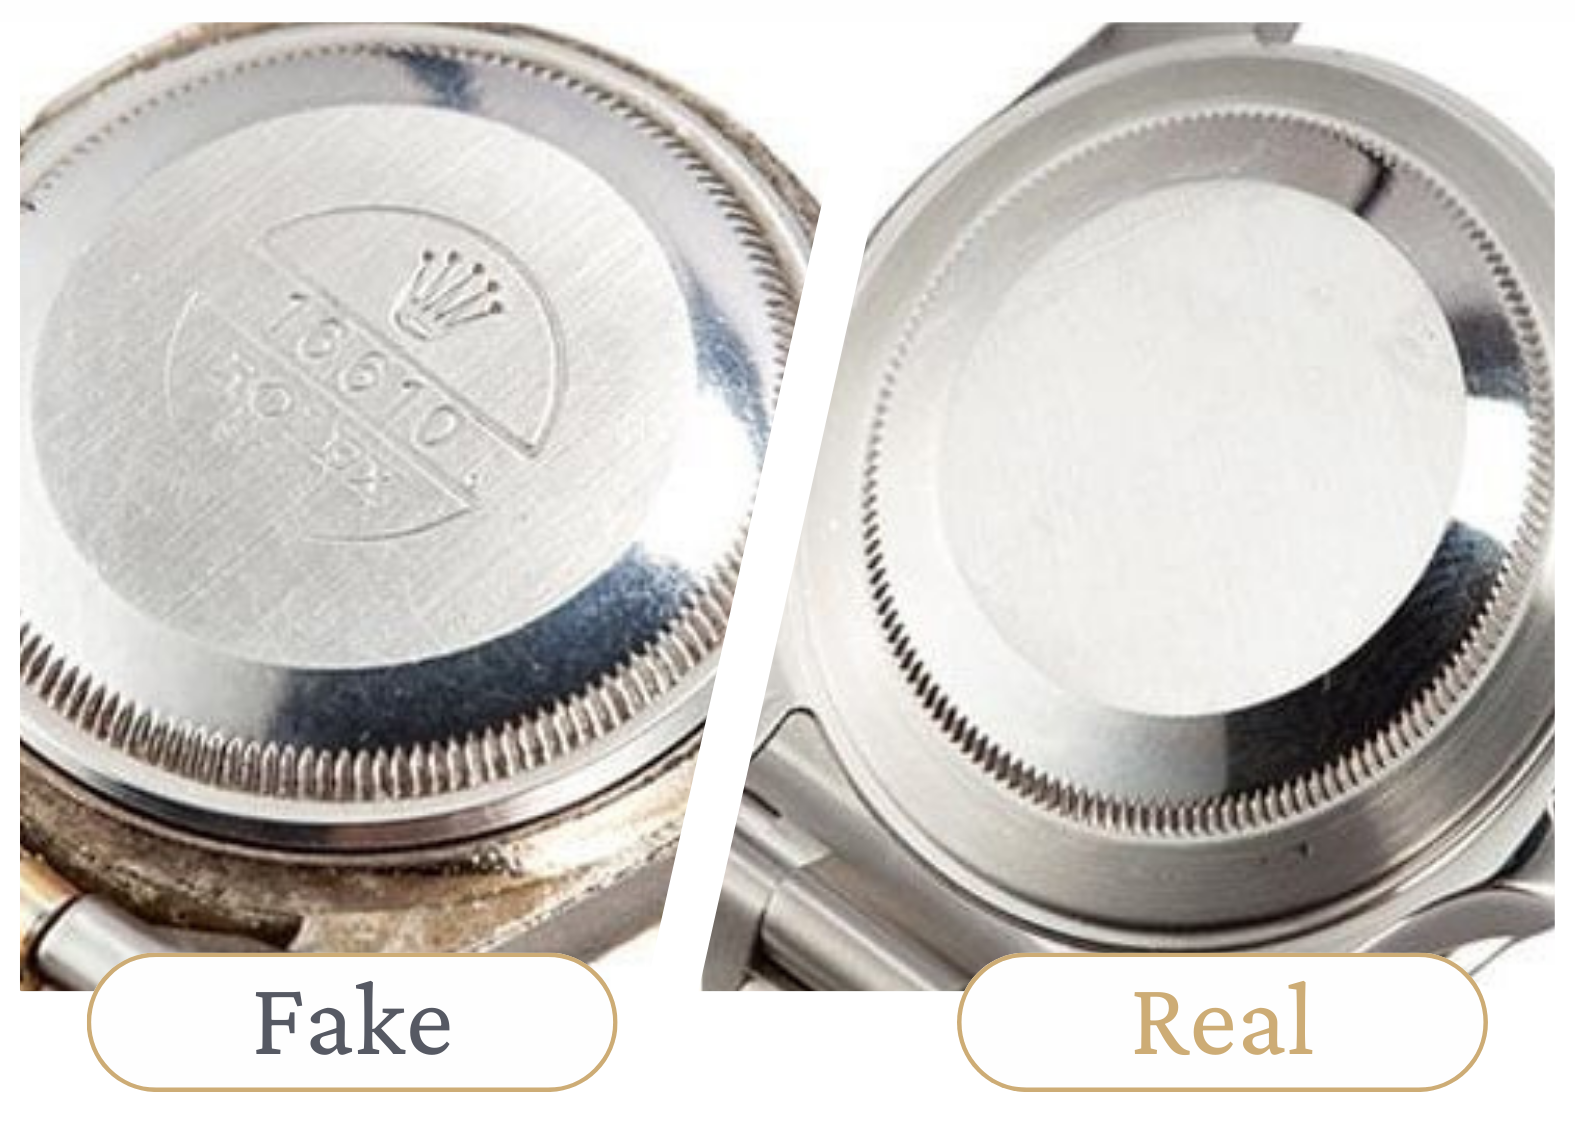 How to Spot a Fake Rolex - Fake VS. Real 9